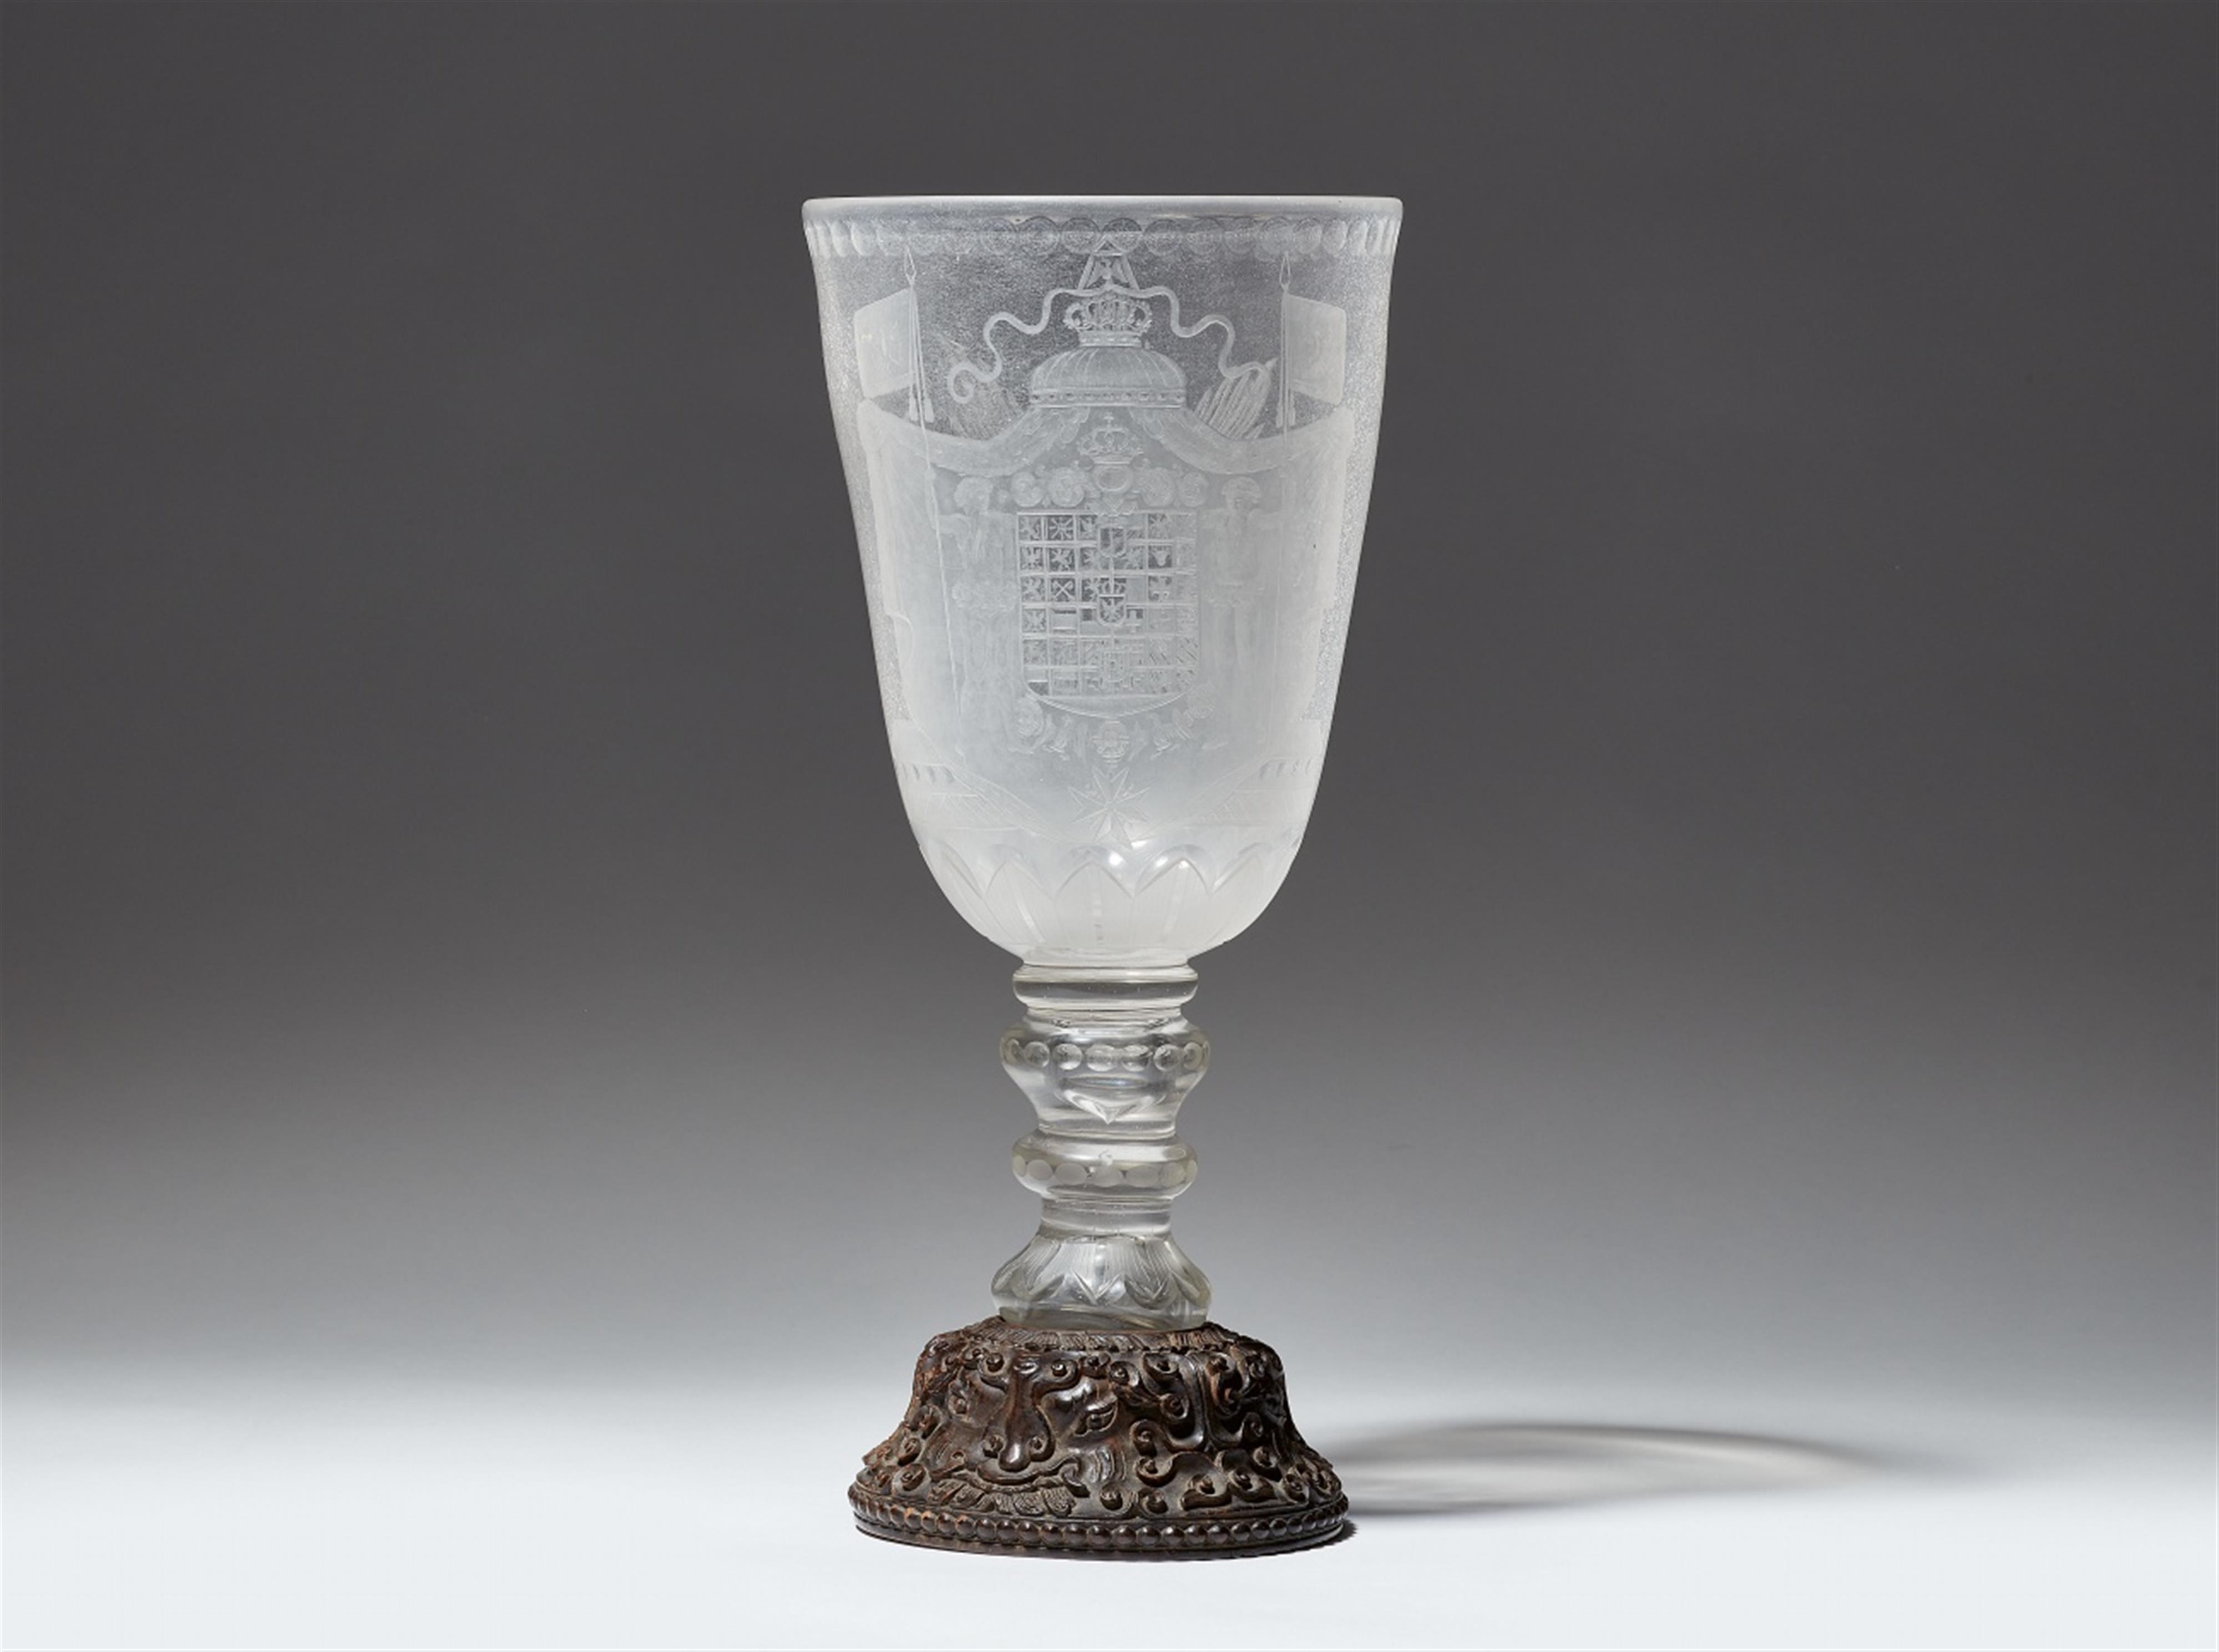 A large, important glass goblet with the coat of arms of King Friedrich Wilhelm I - image-1